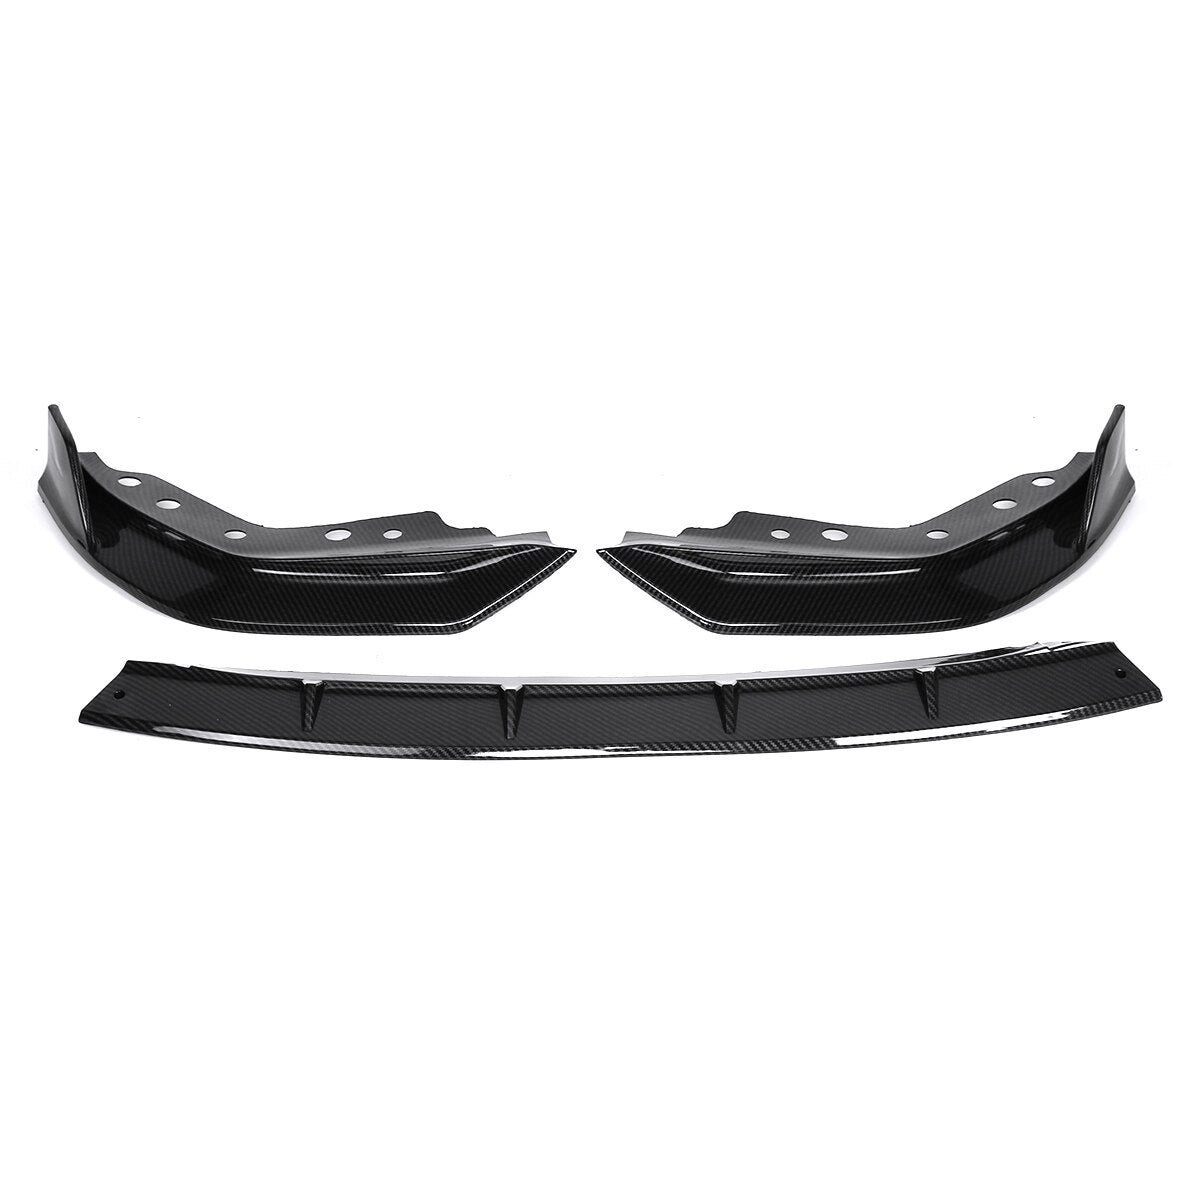 Front Spoiler for BMW G20 pre LCI 2019-2020